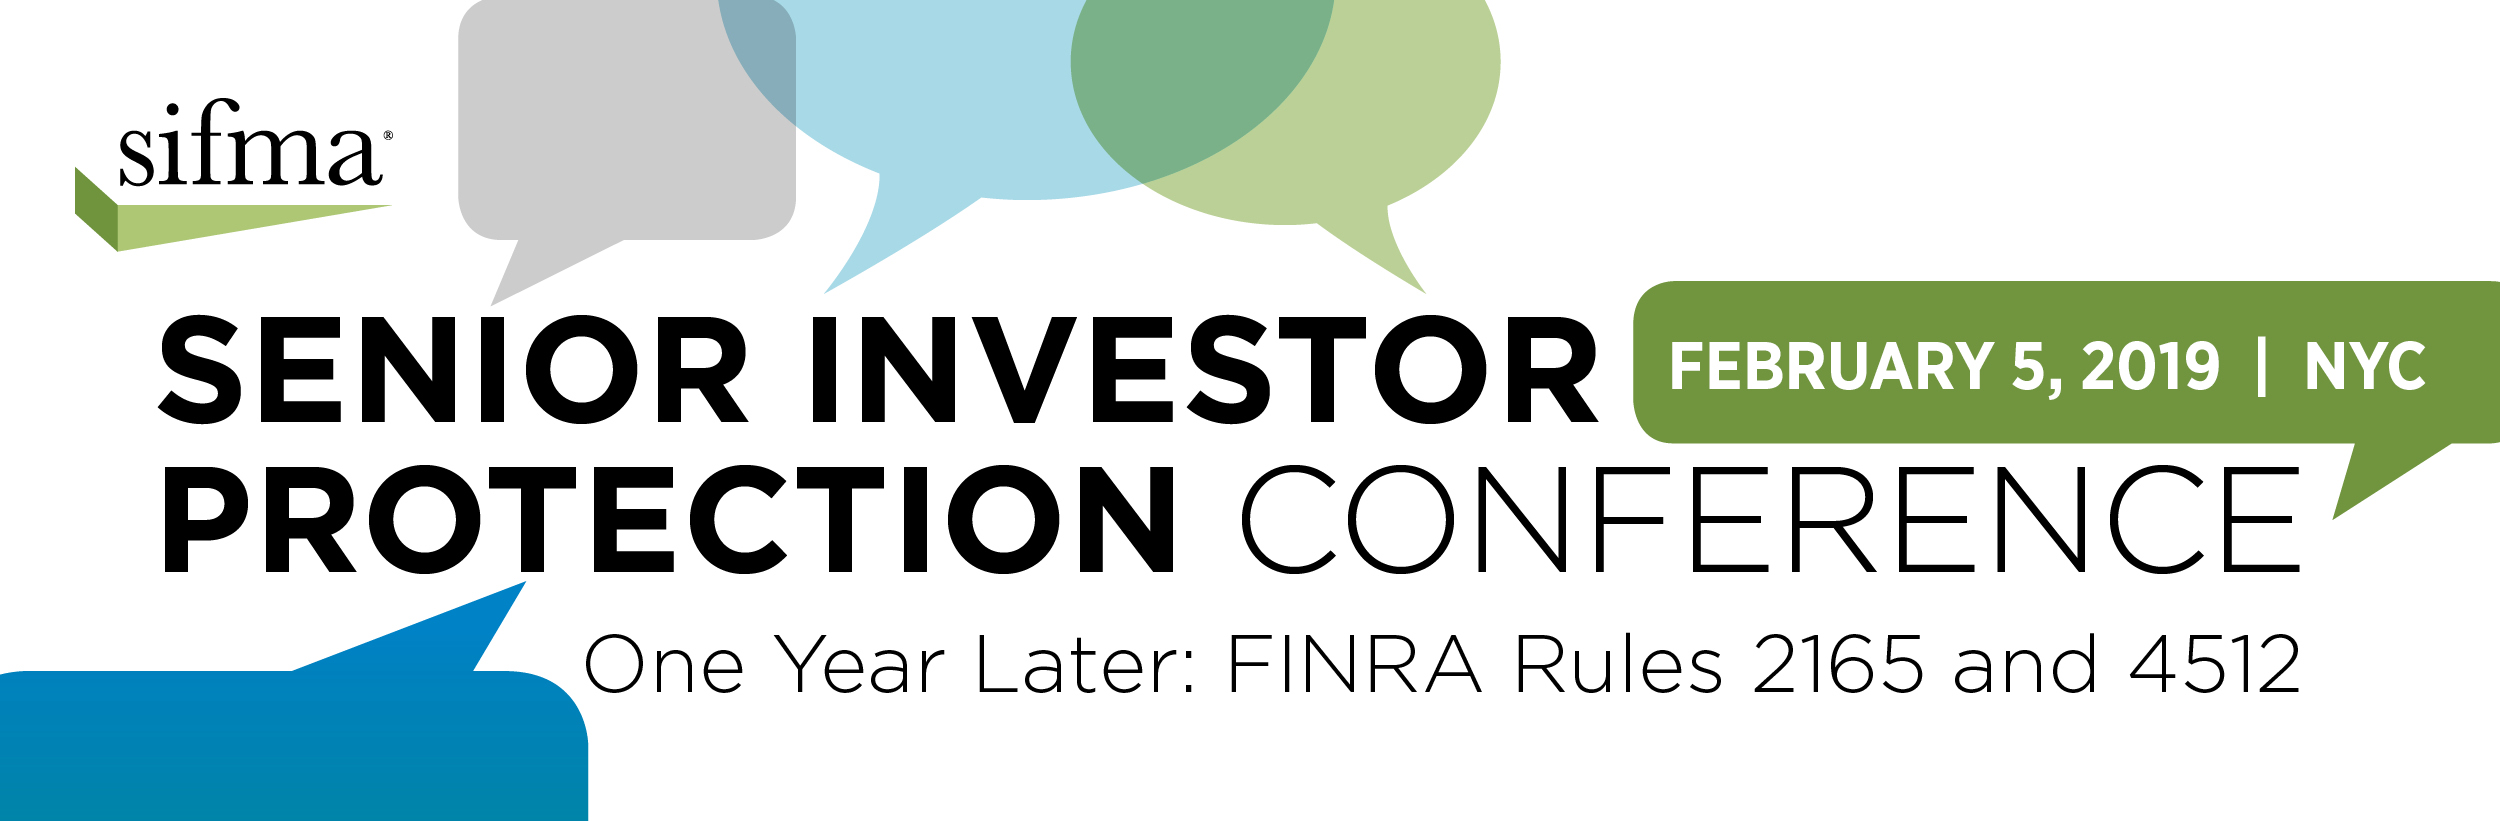 Senior Investor Protection Conference | February 5, 2019 |  SIFMA Conference Center, NYC